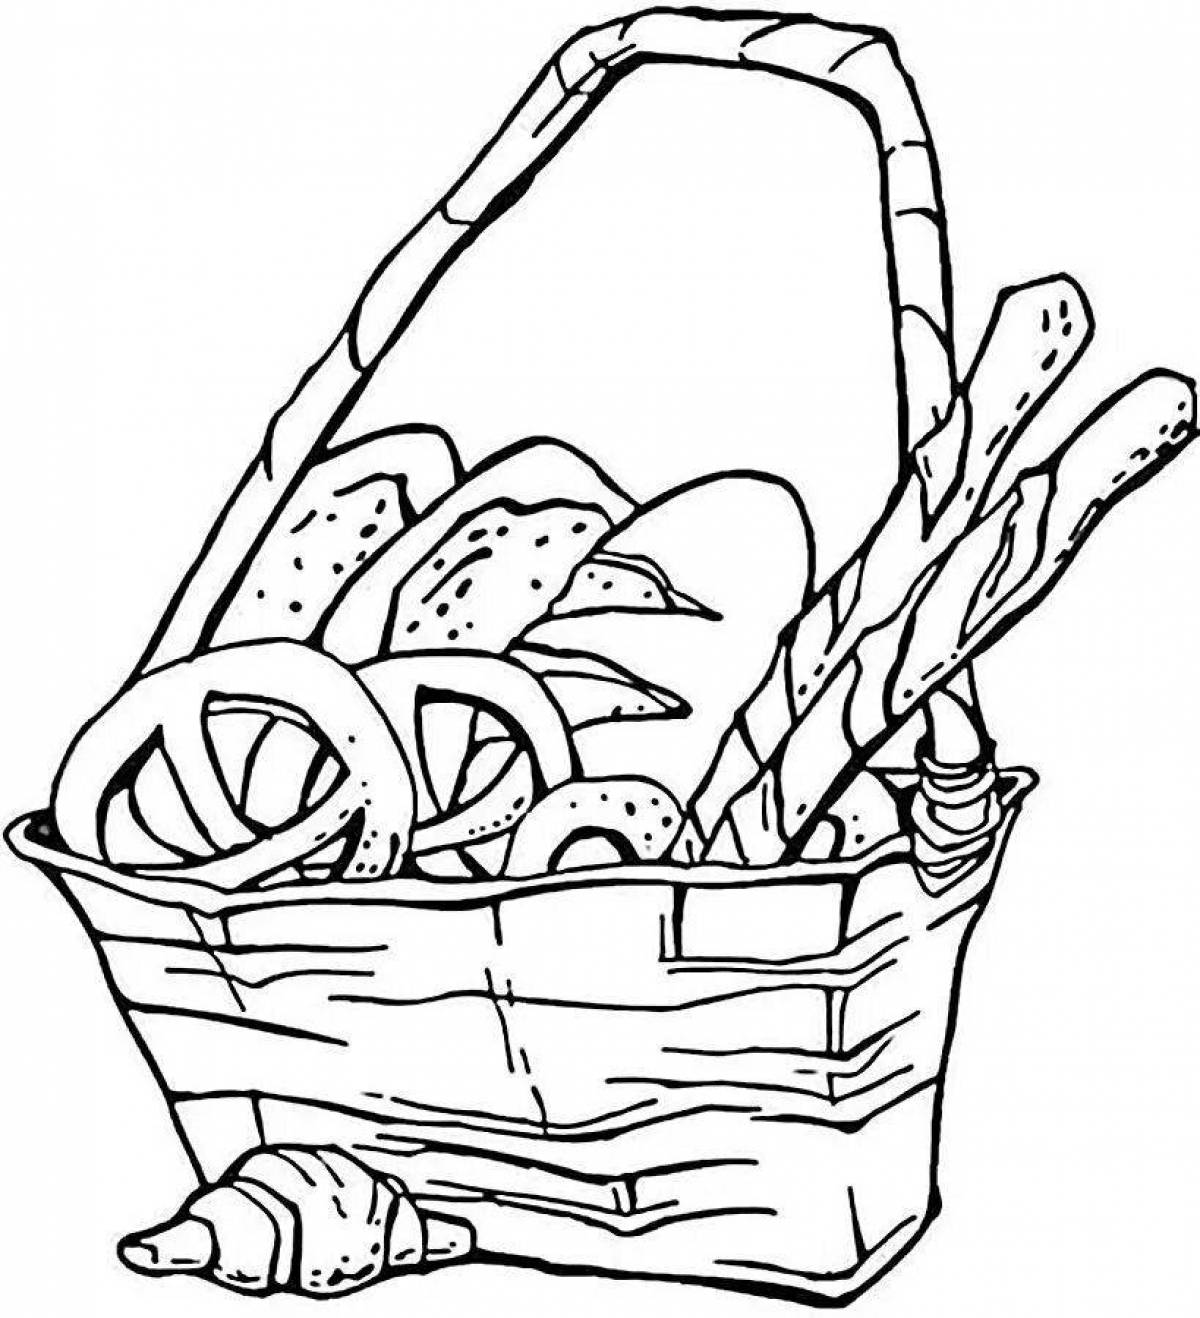 Colourful grocery cart coloring page